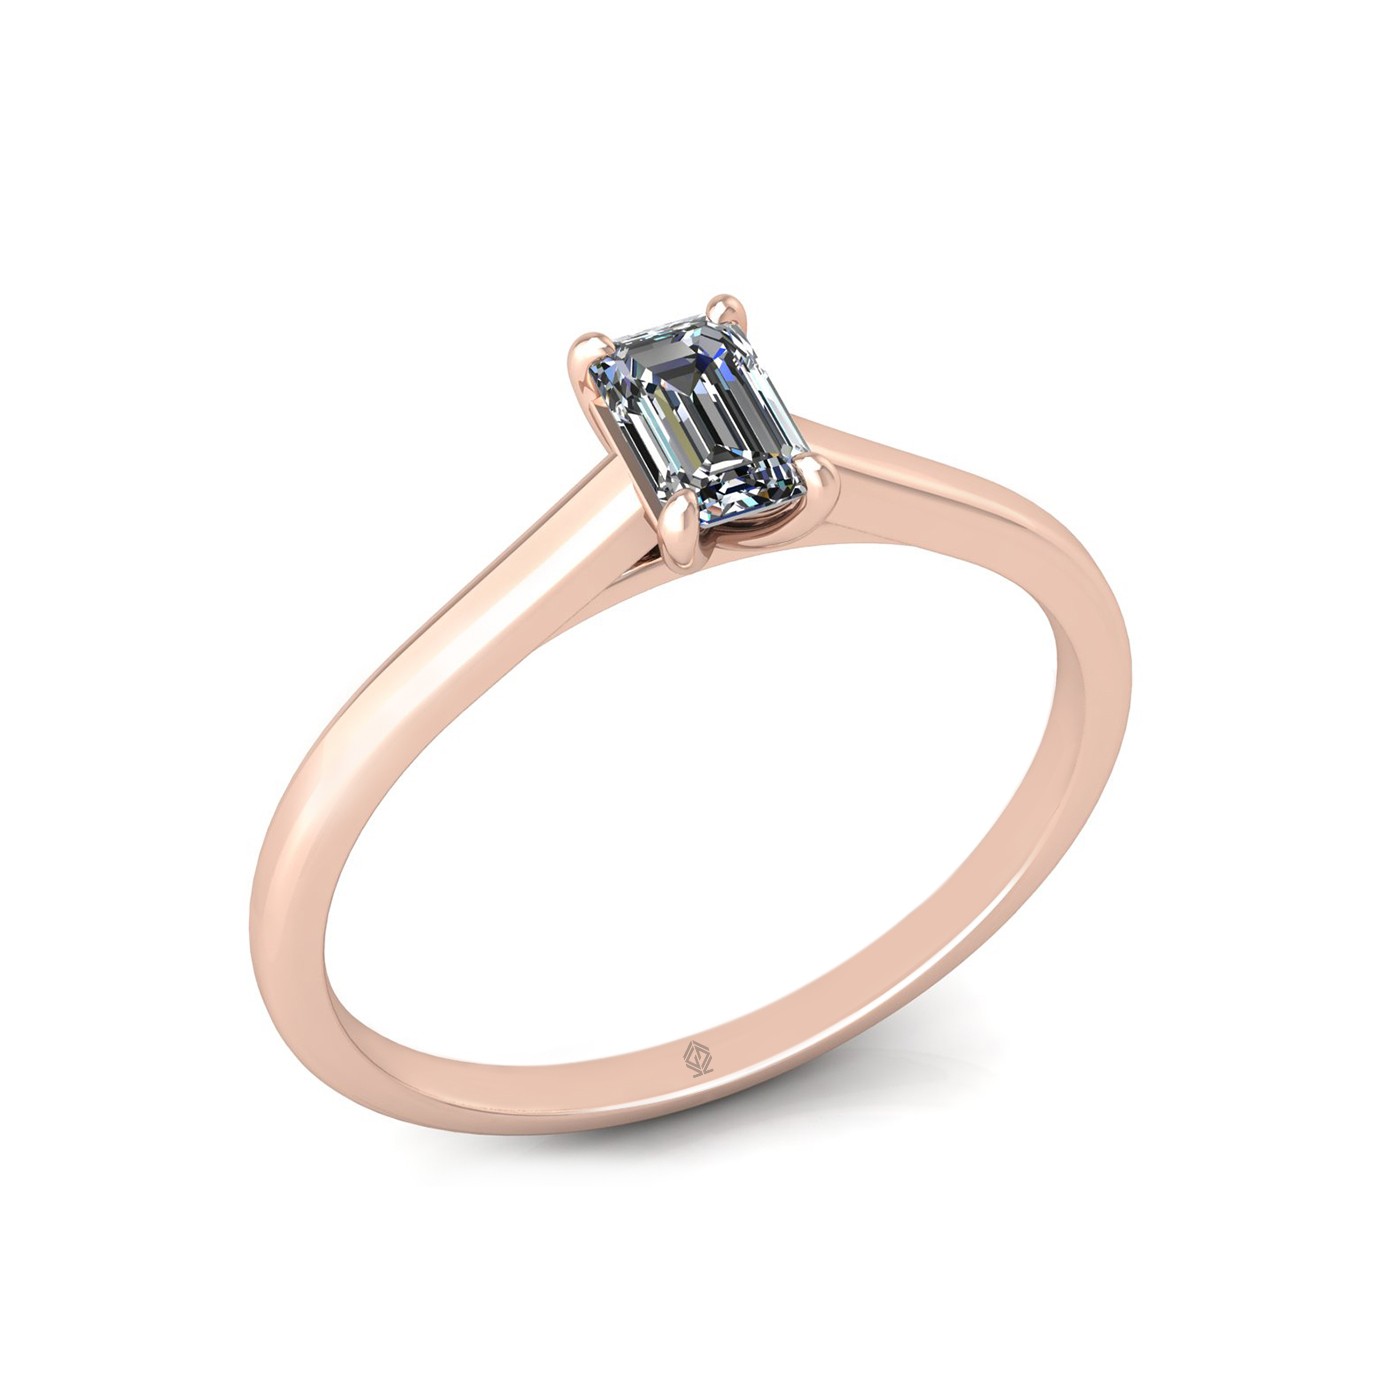 18k rose gold  0,30 ct 4 prongs solitaire emerald cut diamond engagement ring with whisper thin band